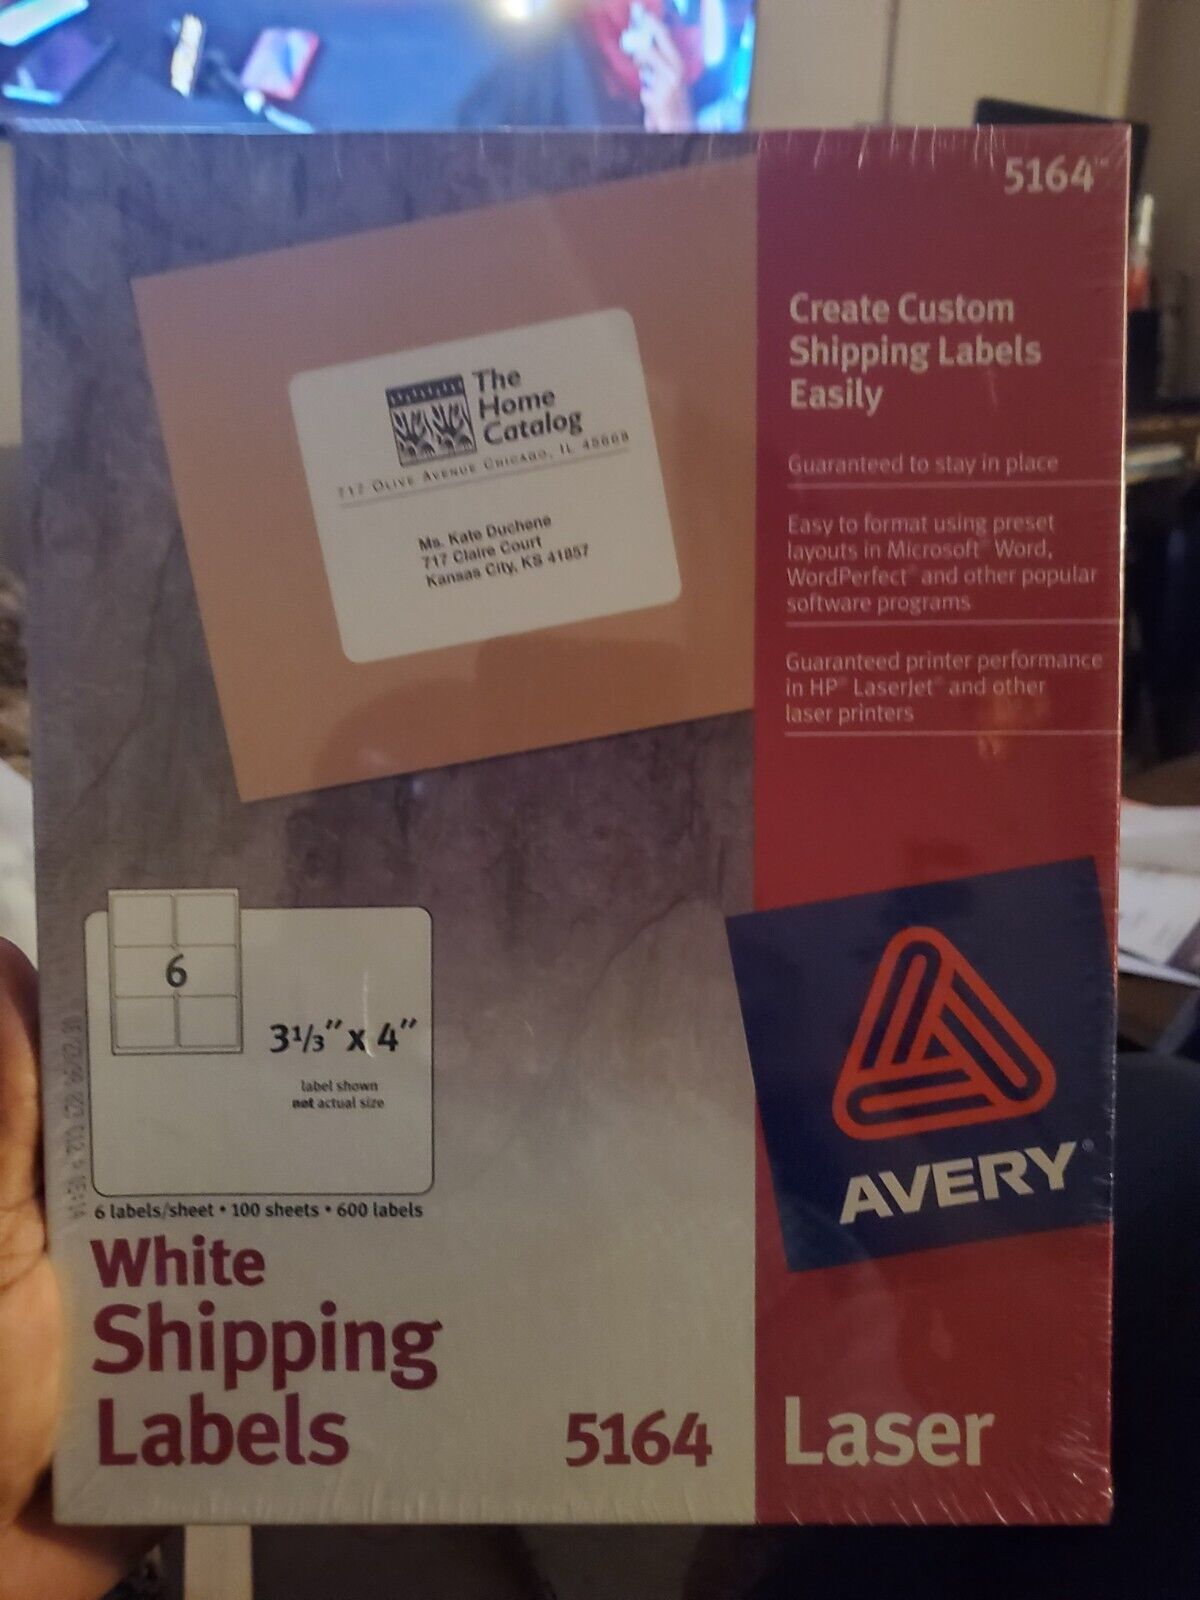 Avery 5164 Laser Shipping Labels 3 1/3 x 4 - 600 Labels 100 Sheets - White - NEW - $28.04